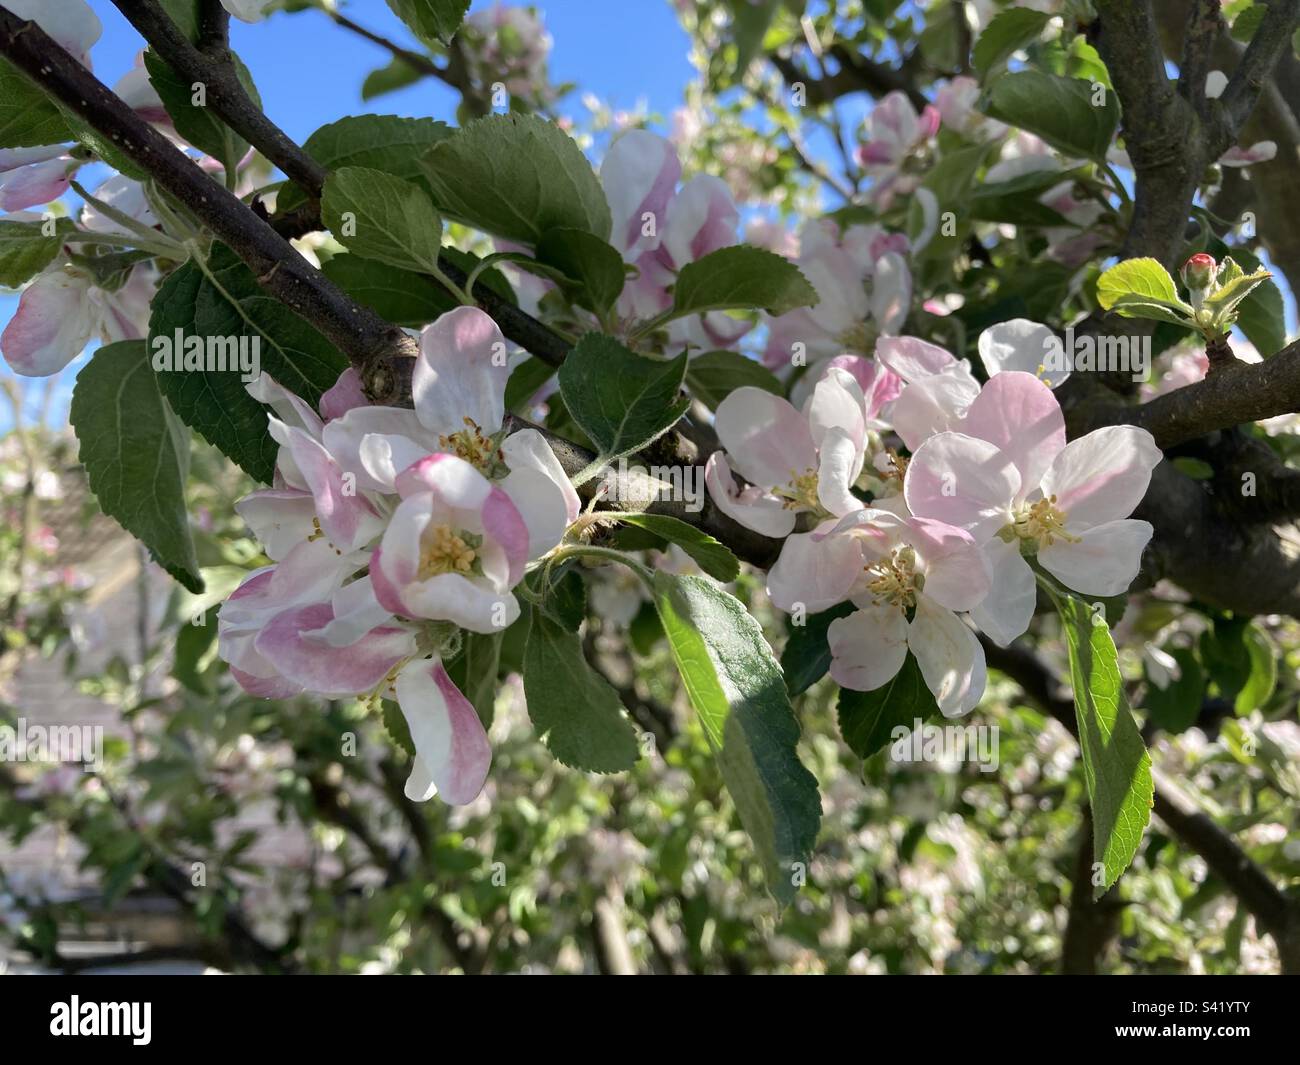 Apple blossom time Stock Photo